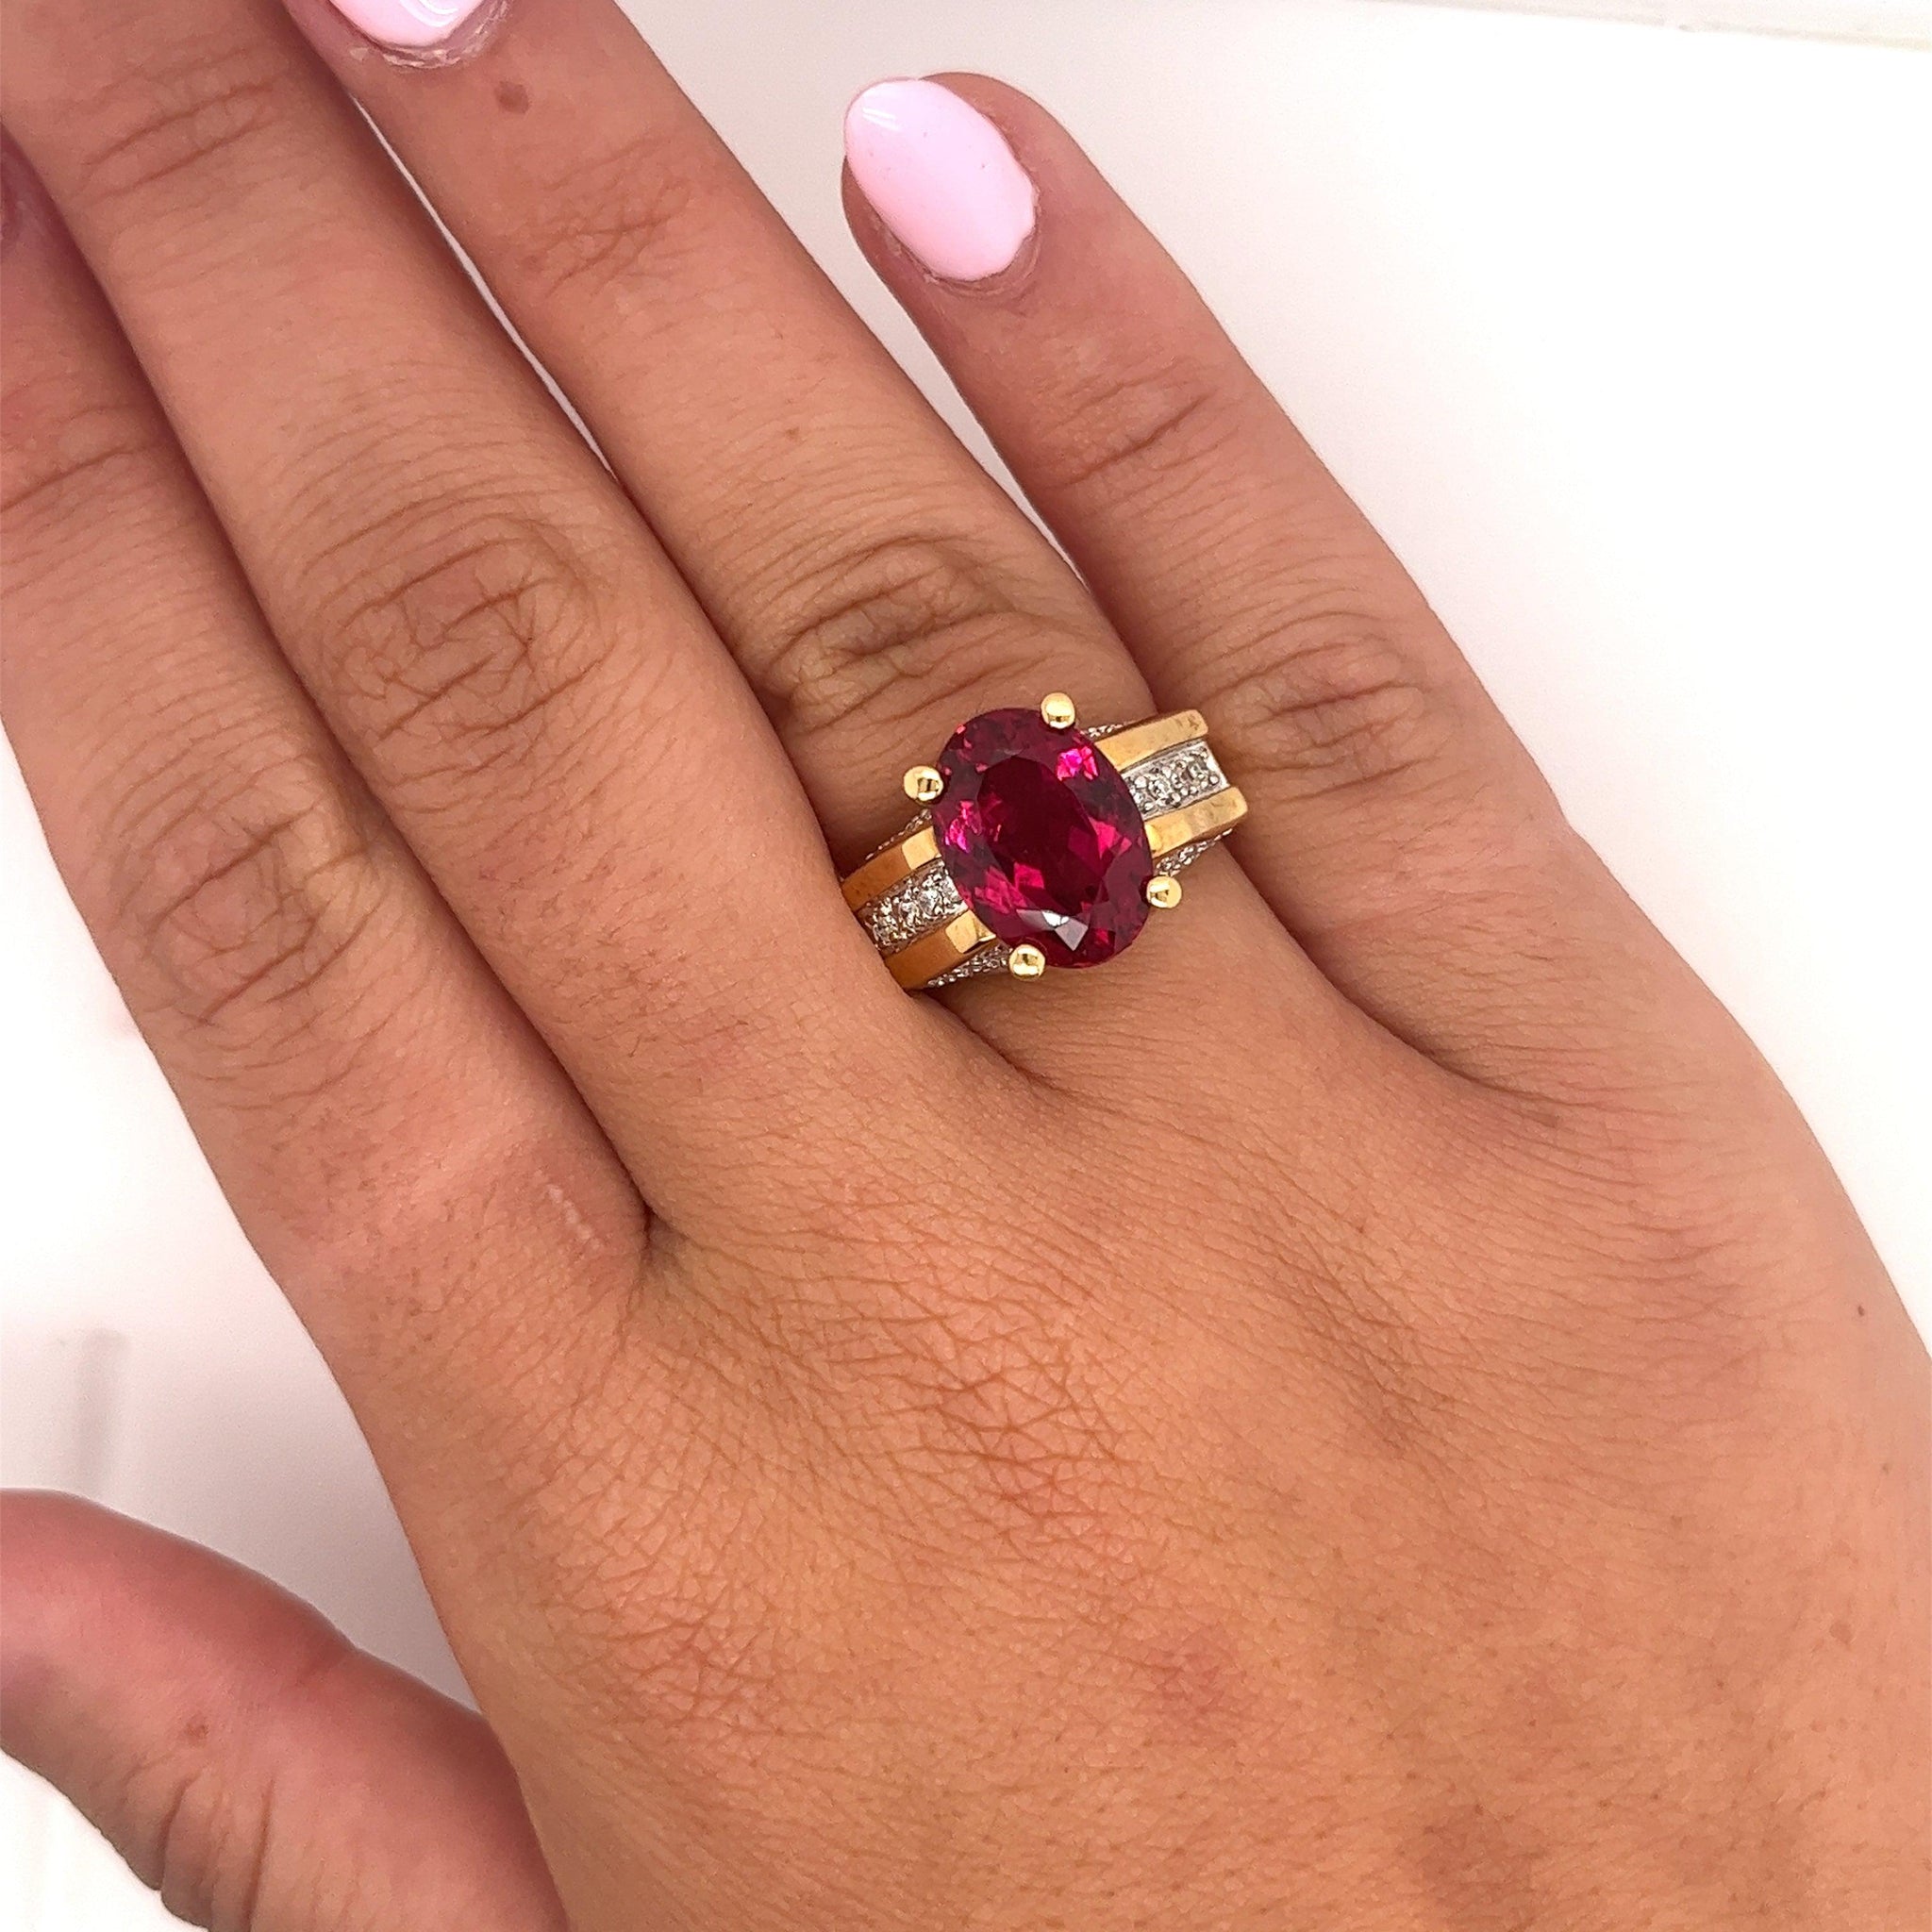 GIA Certified Oval Cut 7 Carat Purplish Red Tourmaline Ring with Diamond Sides in 18K Gold